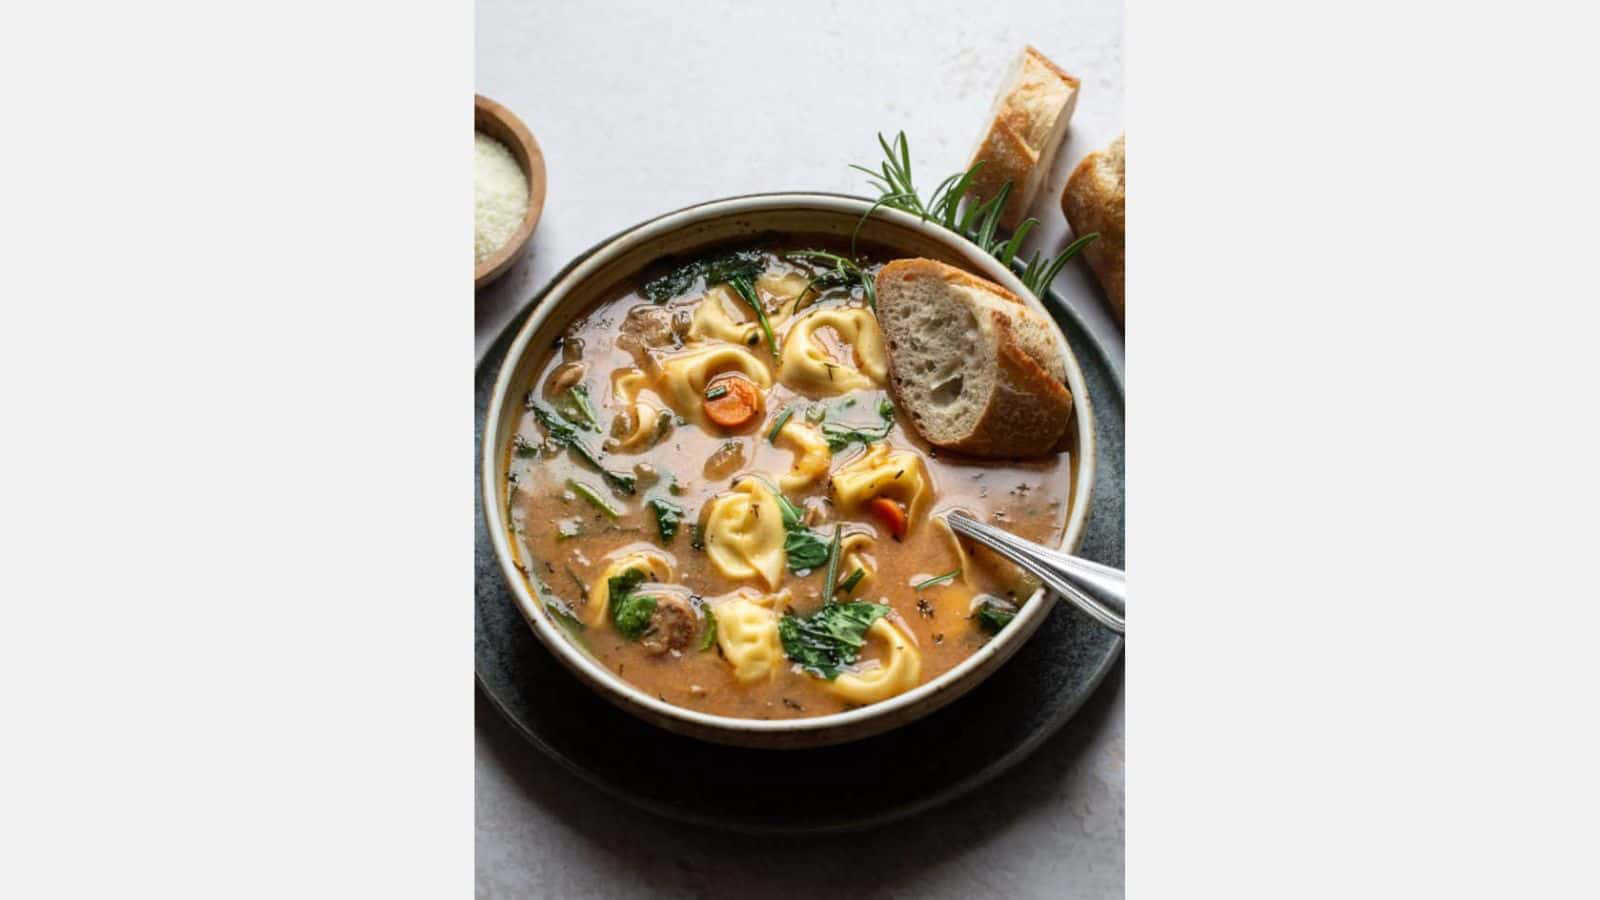 12 Easy and Tasty Soup Recipes for Every Meal